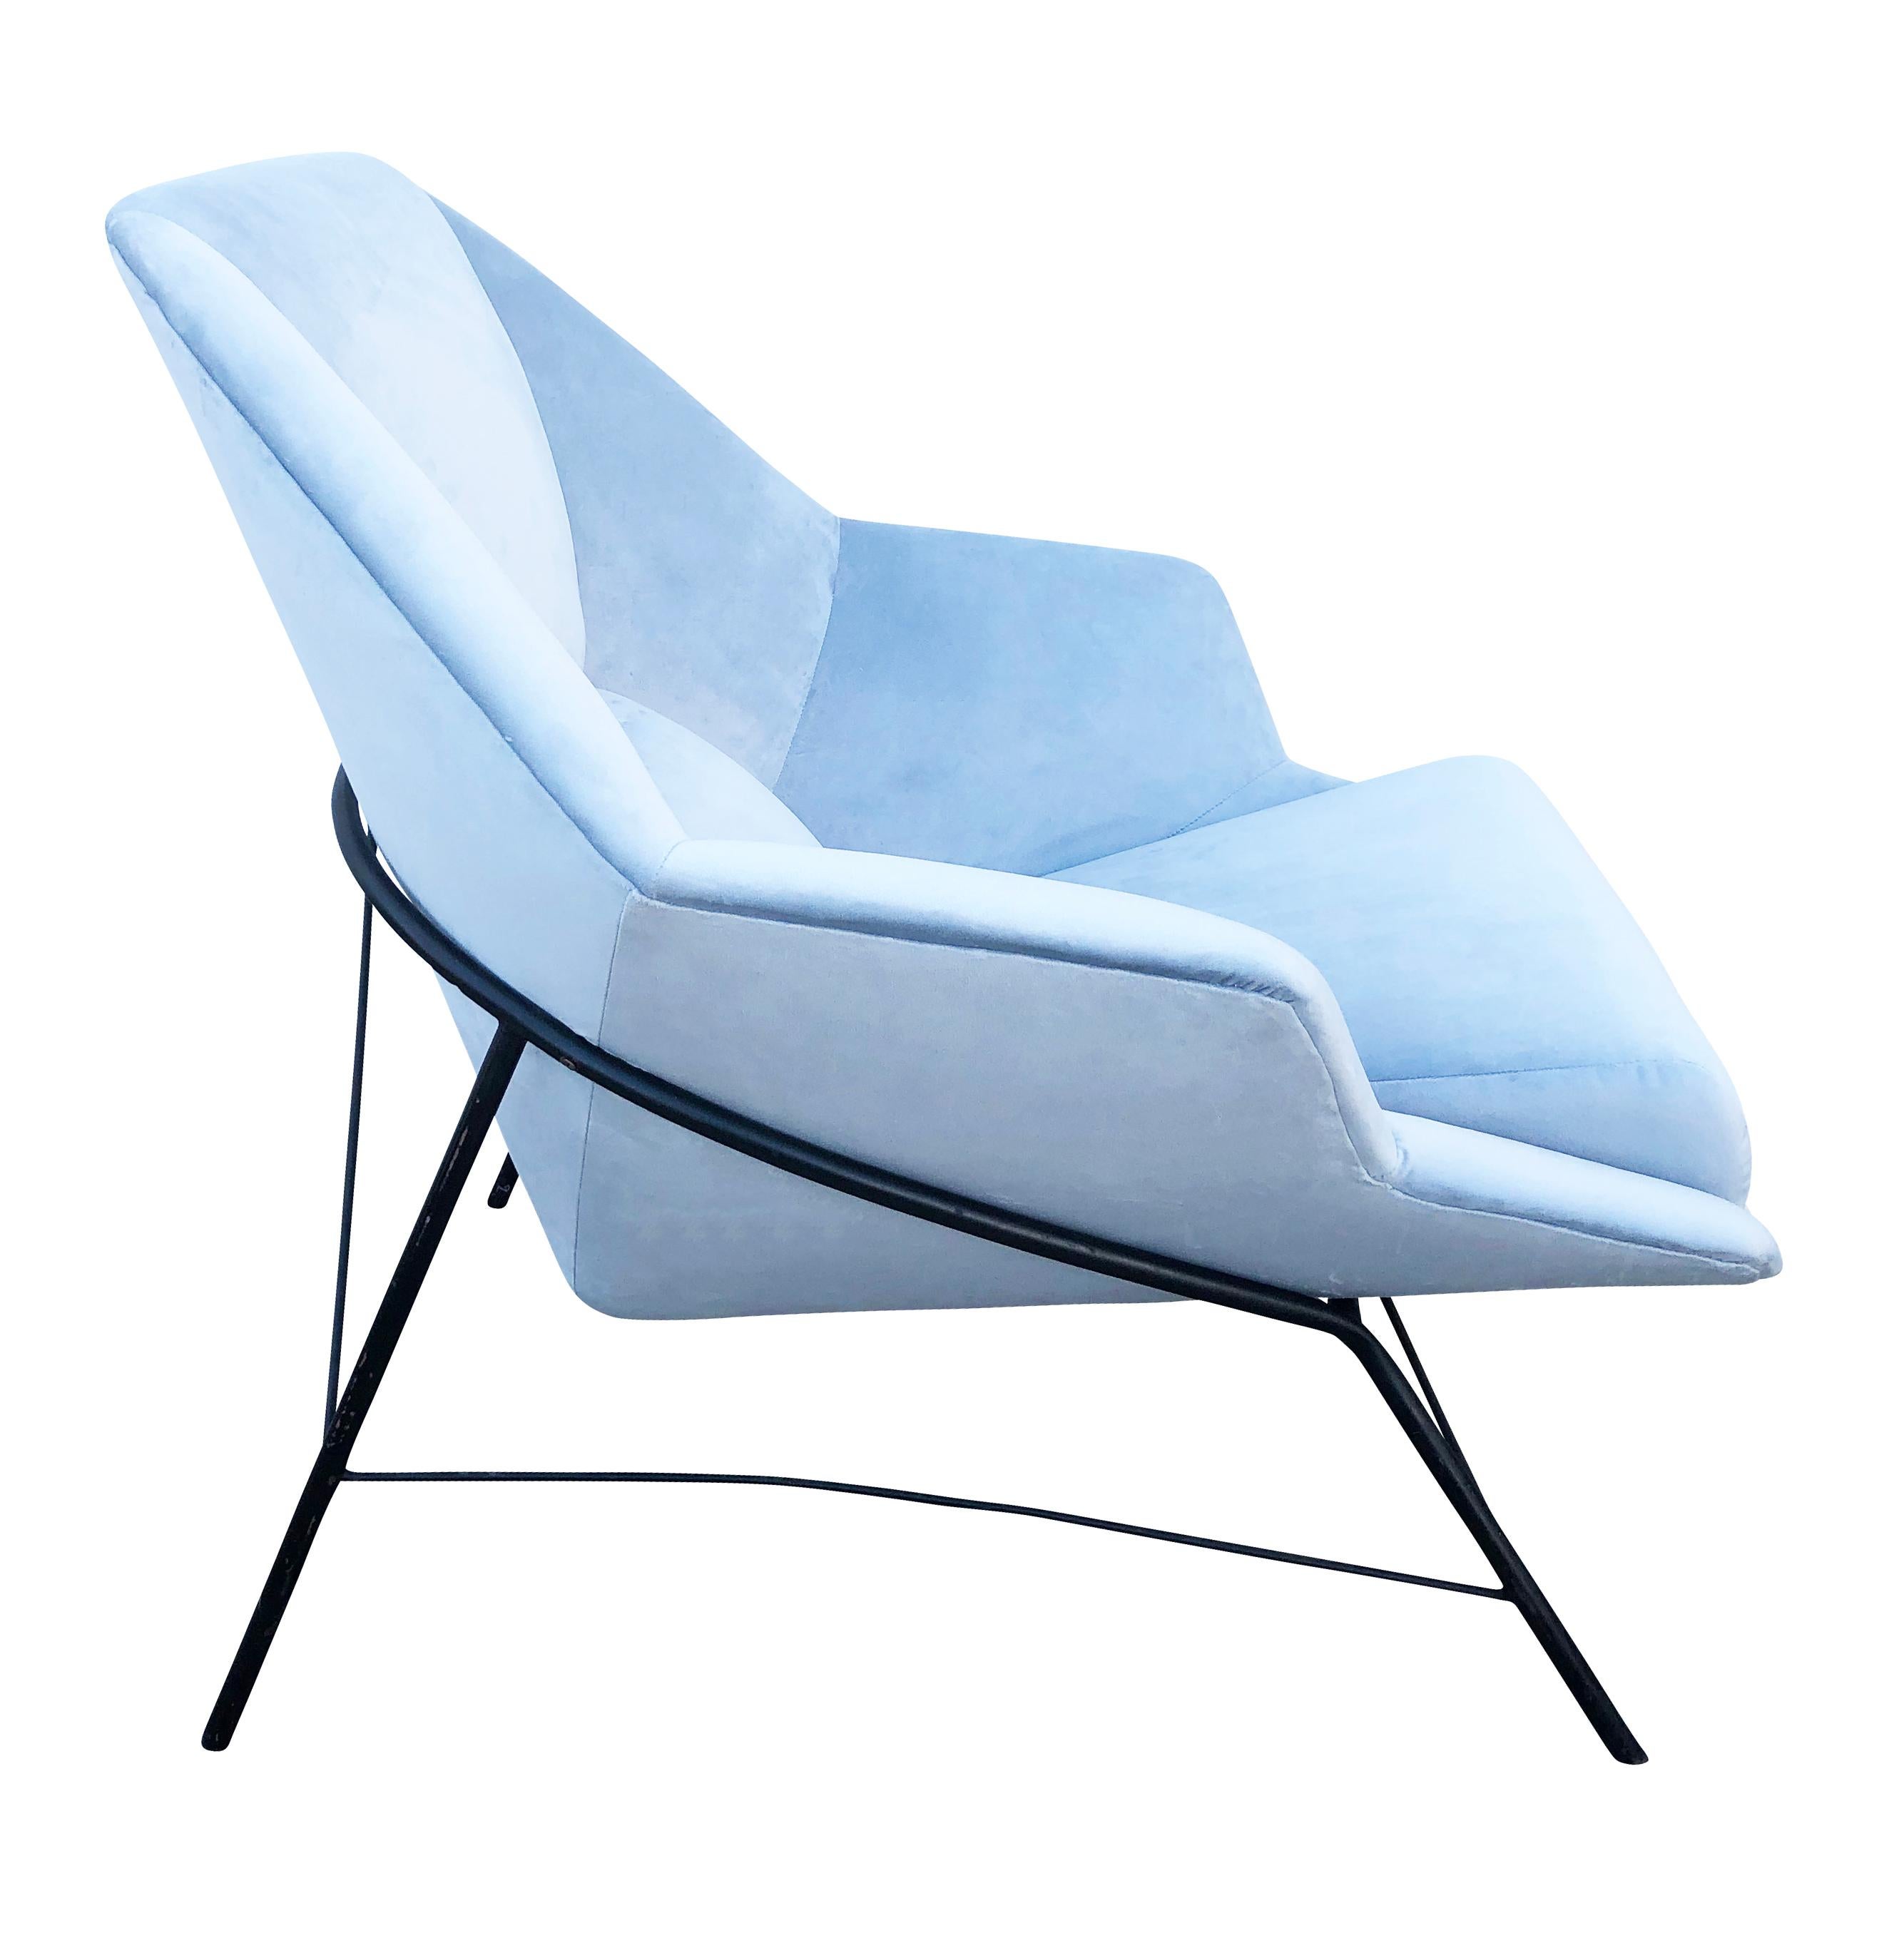 Mid-20th Century Pair of Sculptural Italian Lounge Chairs, 1960s